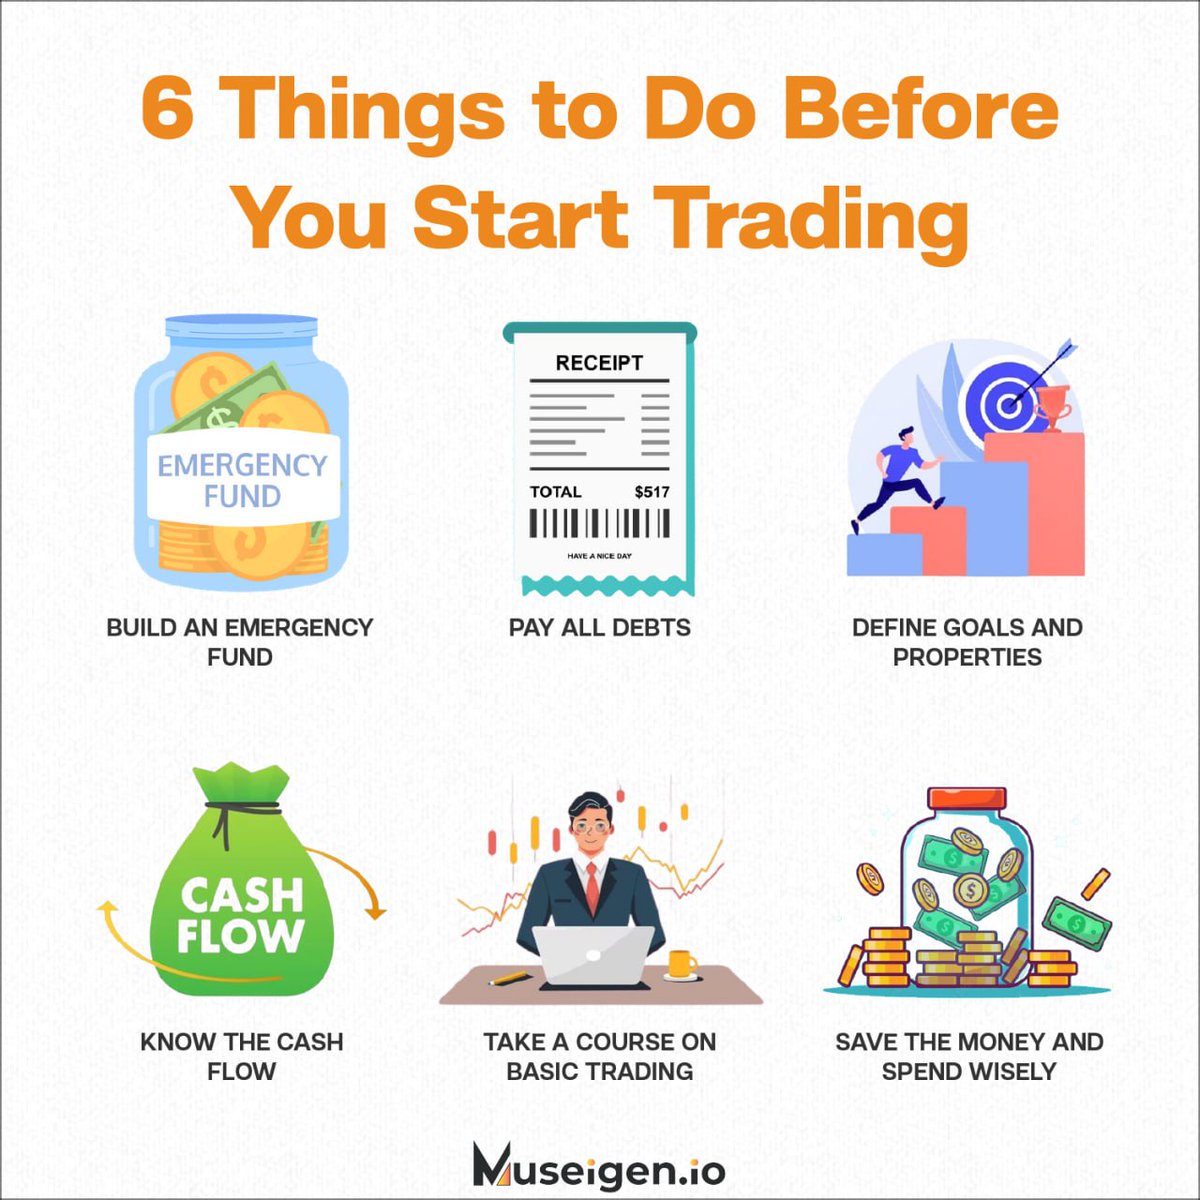 Before you moonwalk into crypto, tick off these 6 must-dos! Prepare for profit & dodge digital dilemmas. Master the market & let your crypto-portfolio soar. 

#LearnWithMuseigen #MuseigenIO #MotivationMonday #TradingTips #TraningStrategy #InvestmentJourney #MarketKnowledge